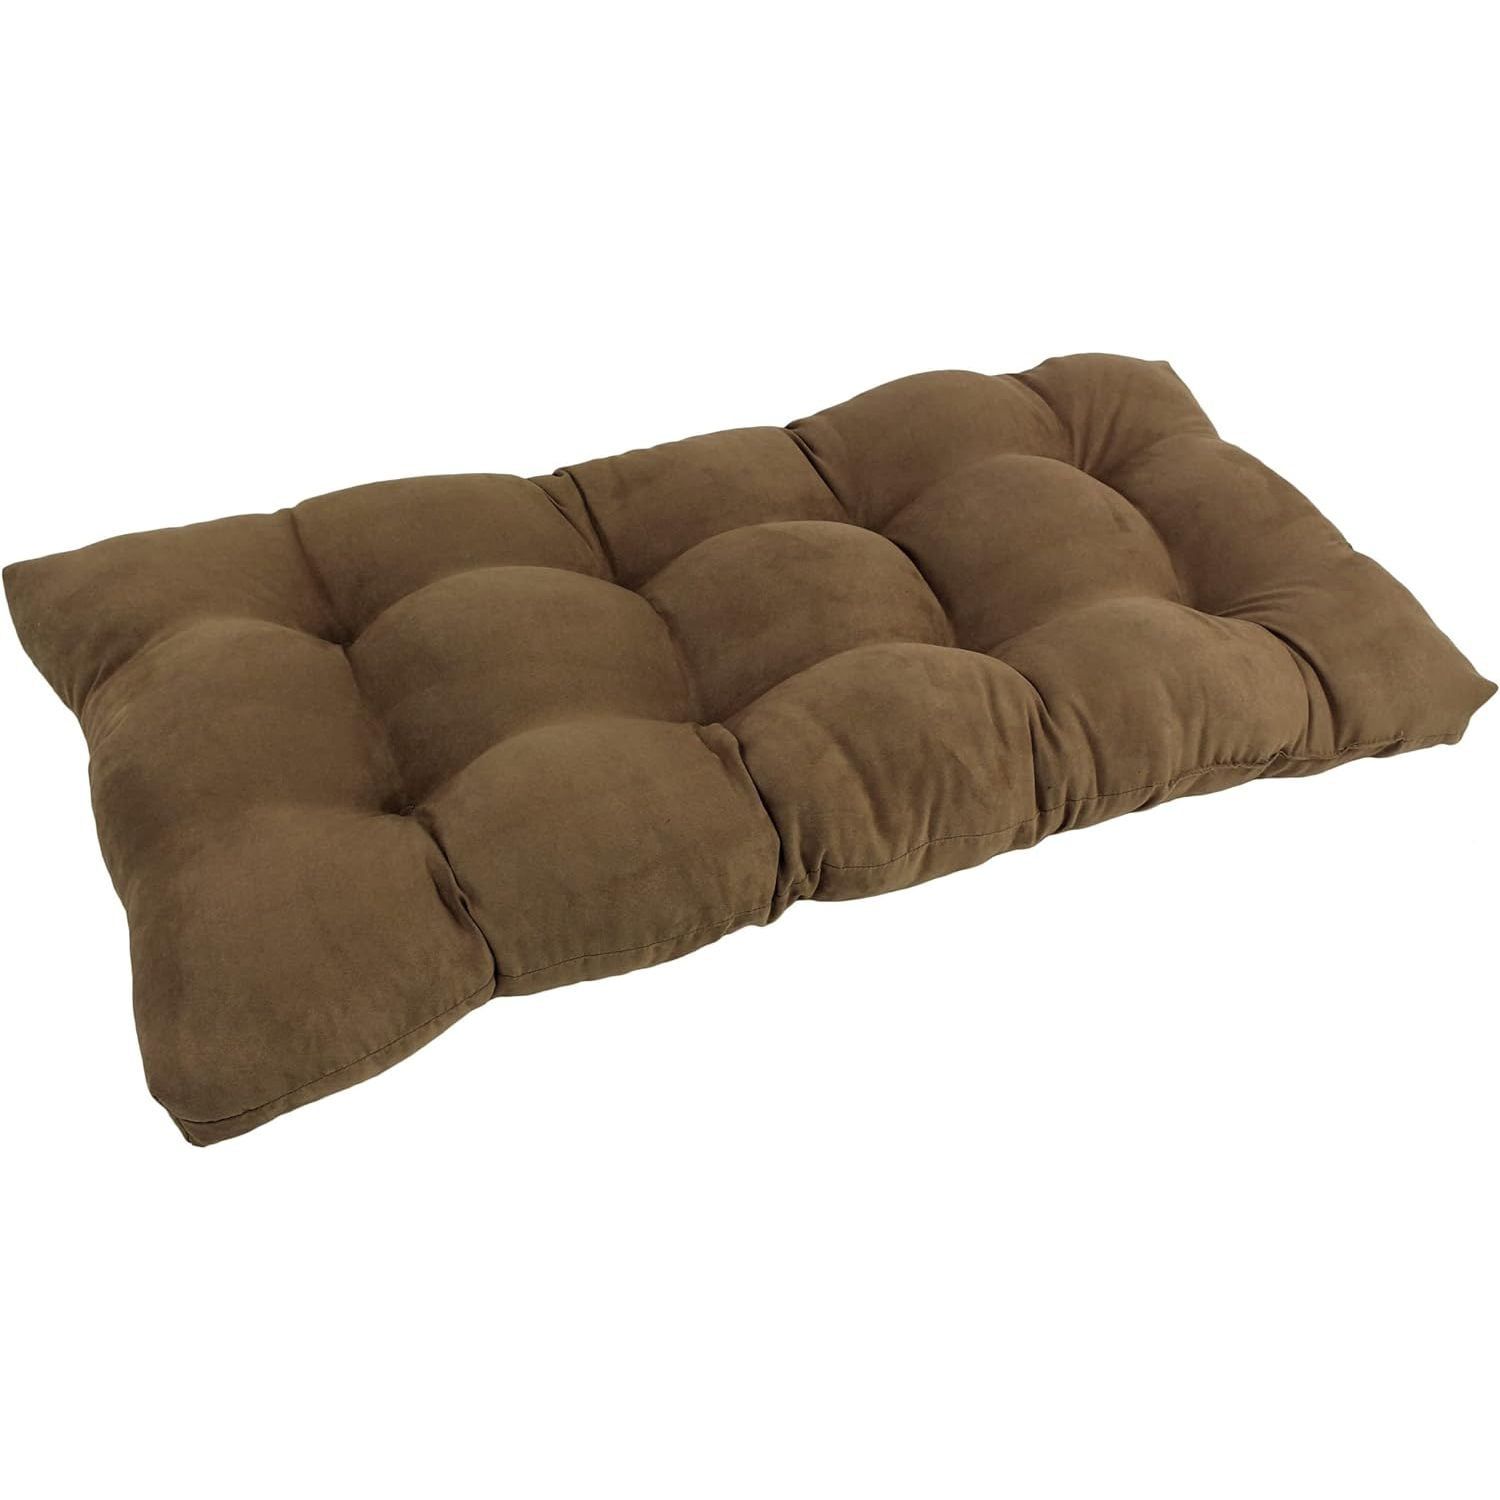 Saddle Brown Microsuede Tufted Loveseat Cushion, 42" x 19"